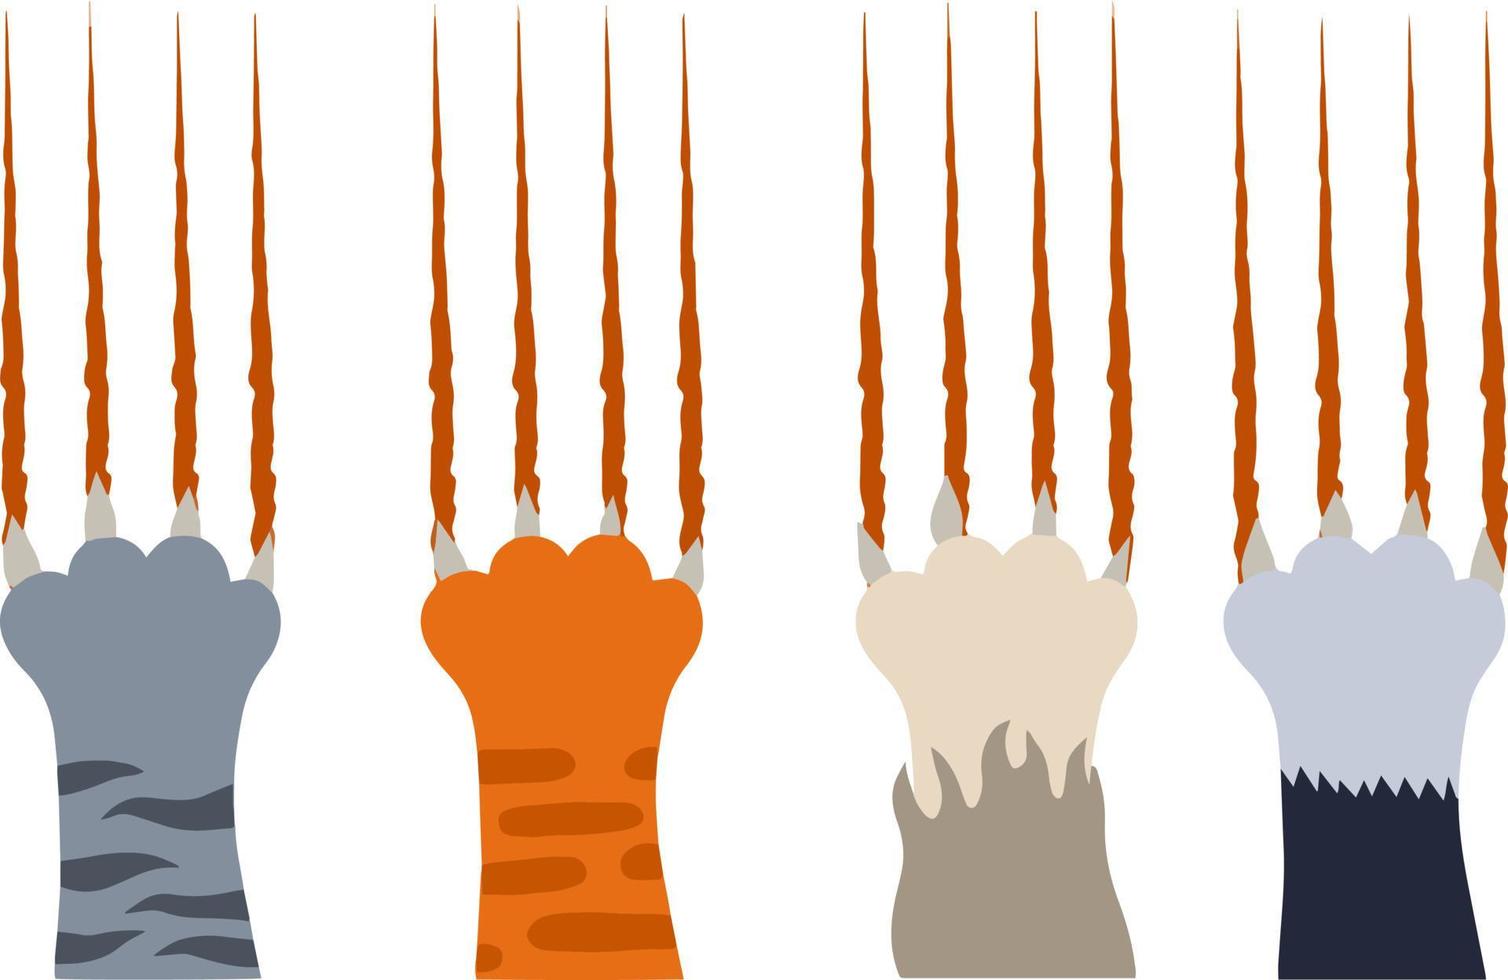 Set of different cat paws with claws and bloody scratch marks. Injury and cut. Cartoon flat illustration. Hands of the beast. Angry pet. Red, black, grey and white striped cat with fur vector